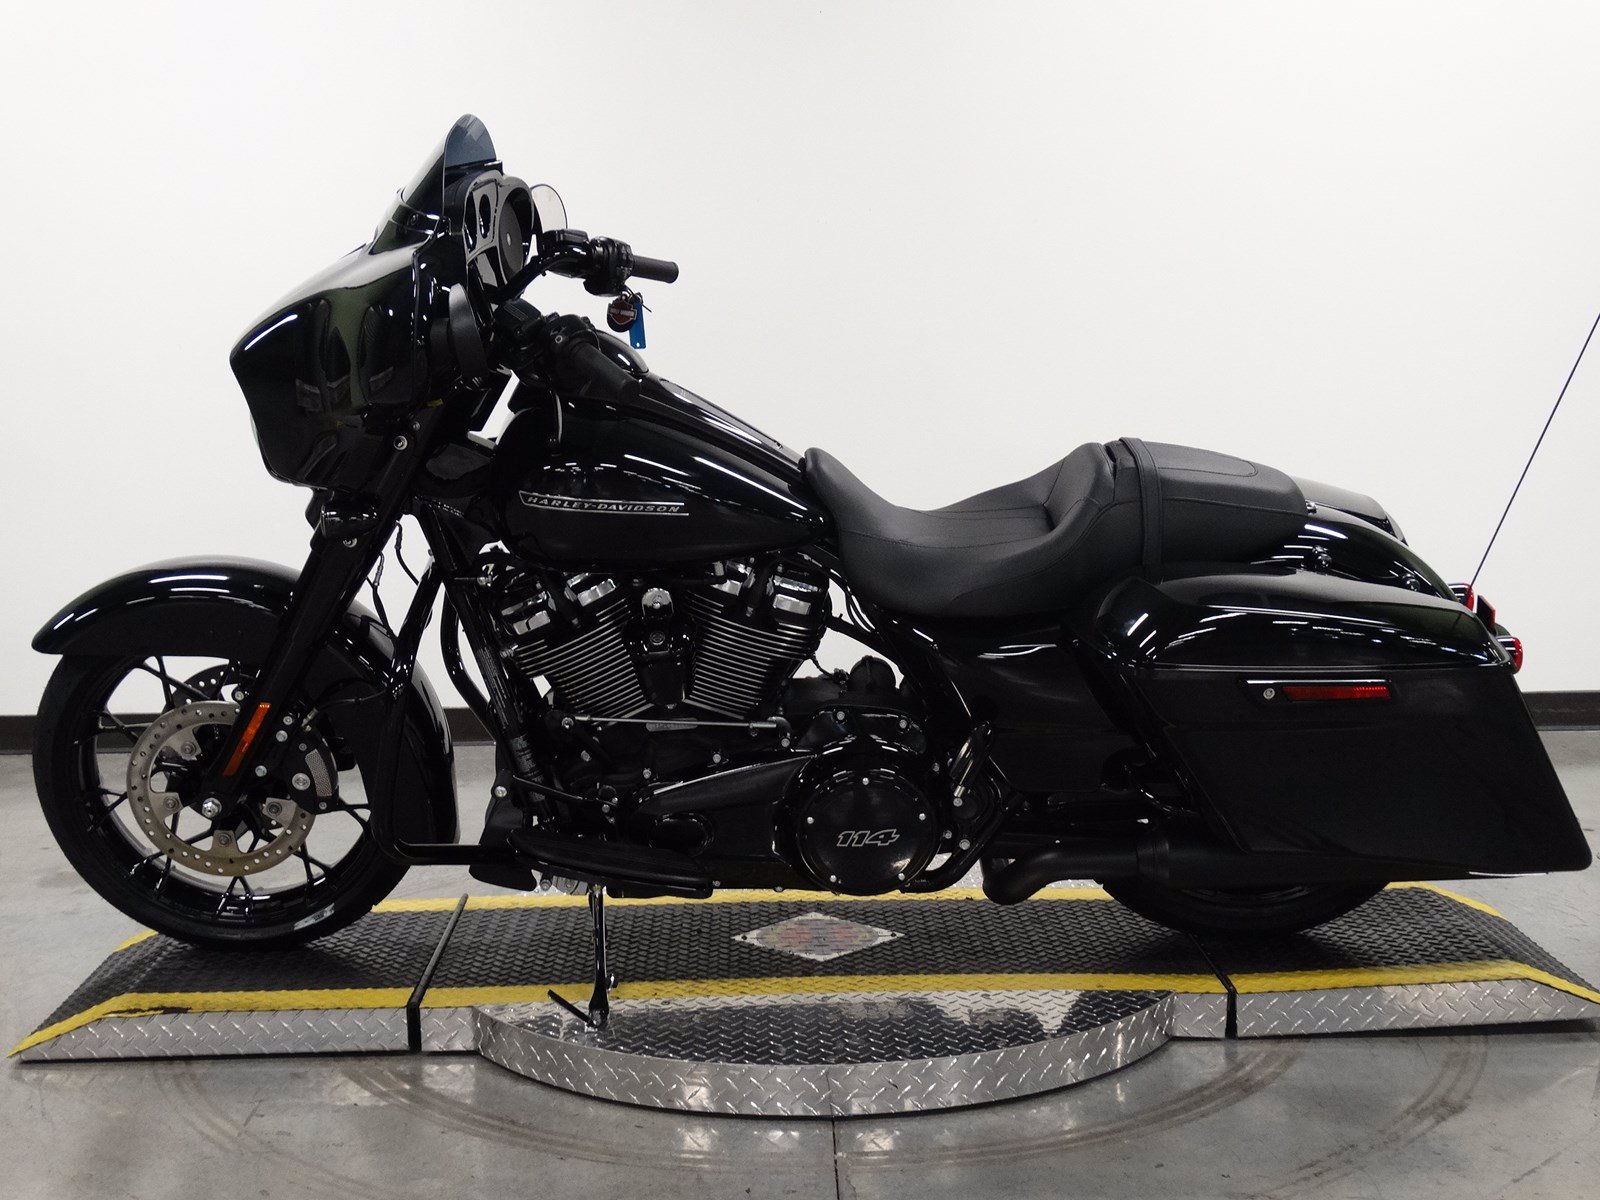 New 2020 Harley-Davidson Street Glide Special FLHXS Touring in